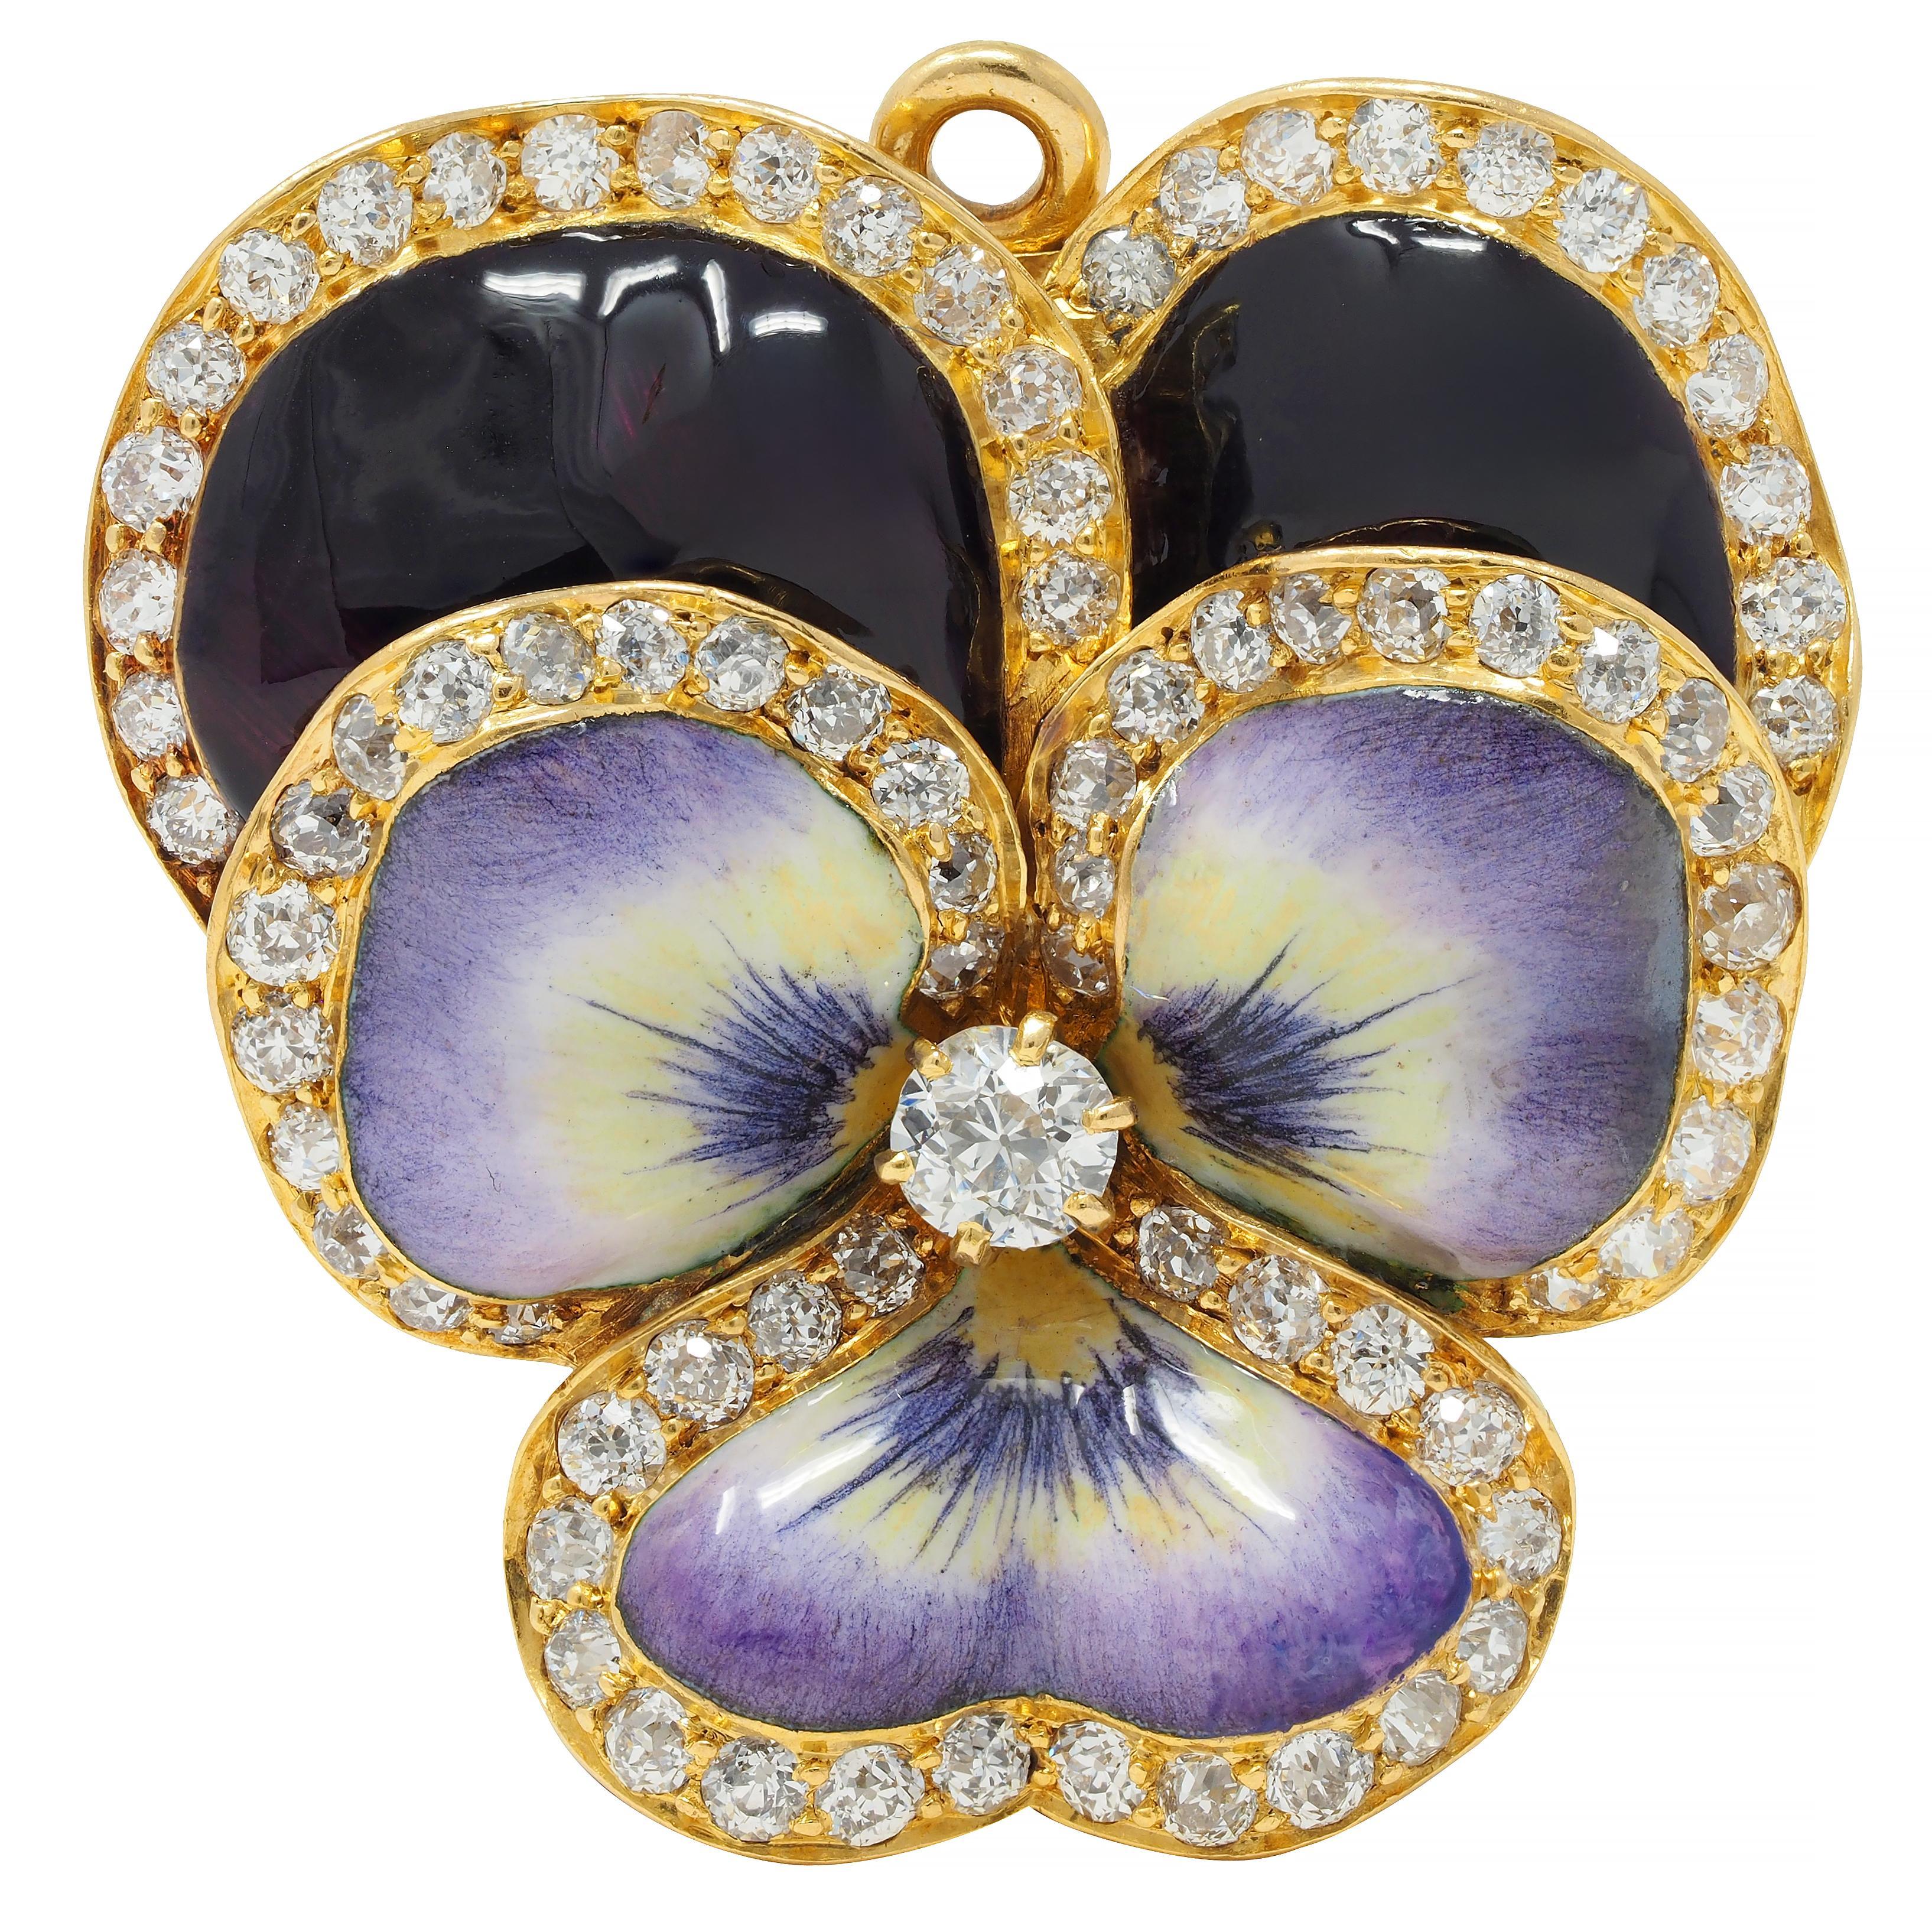 Pendant brooch is designed as a pansy flower with delicately painted dimensional enamel petals
Glossy opaque purple, maroon, white, and yellow - exhibiting minimal loss
With old European cut diamonds bead set along petal edges throughout
Centering